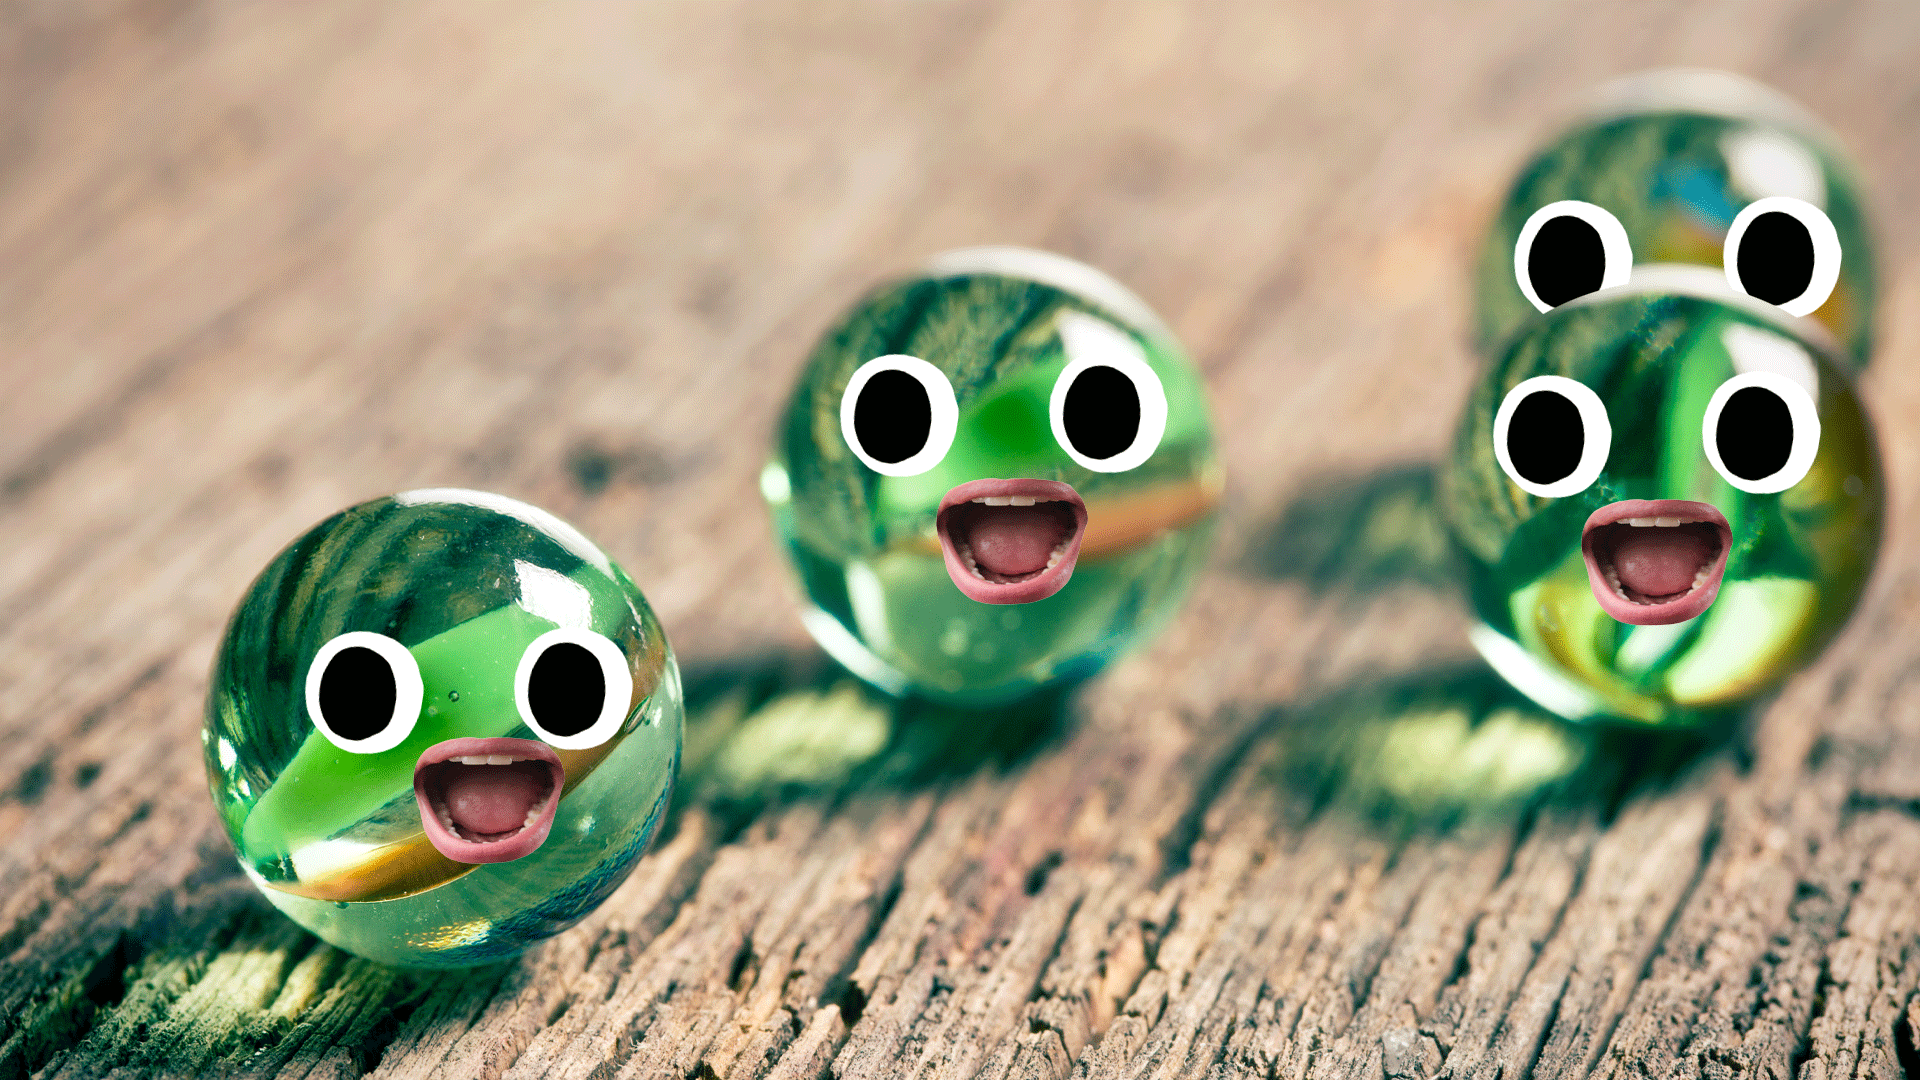 A group of marbles